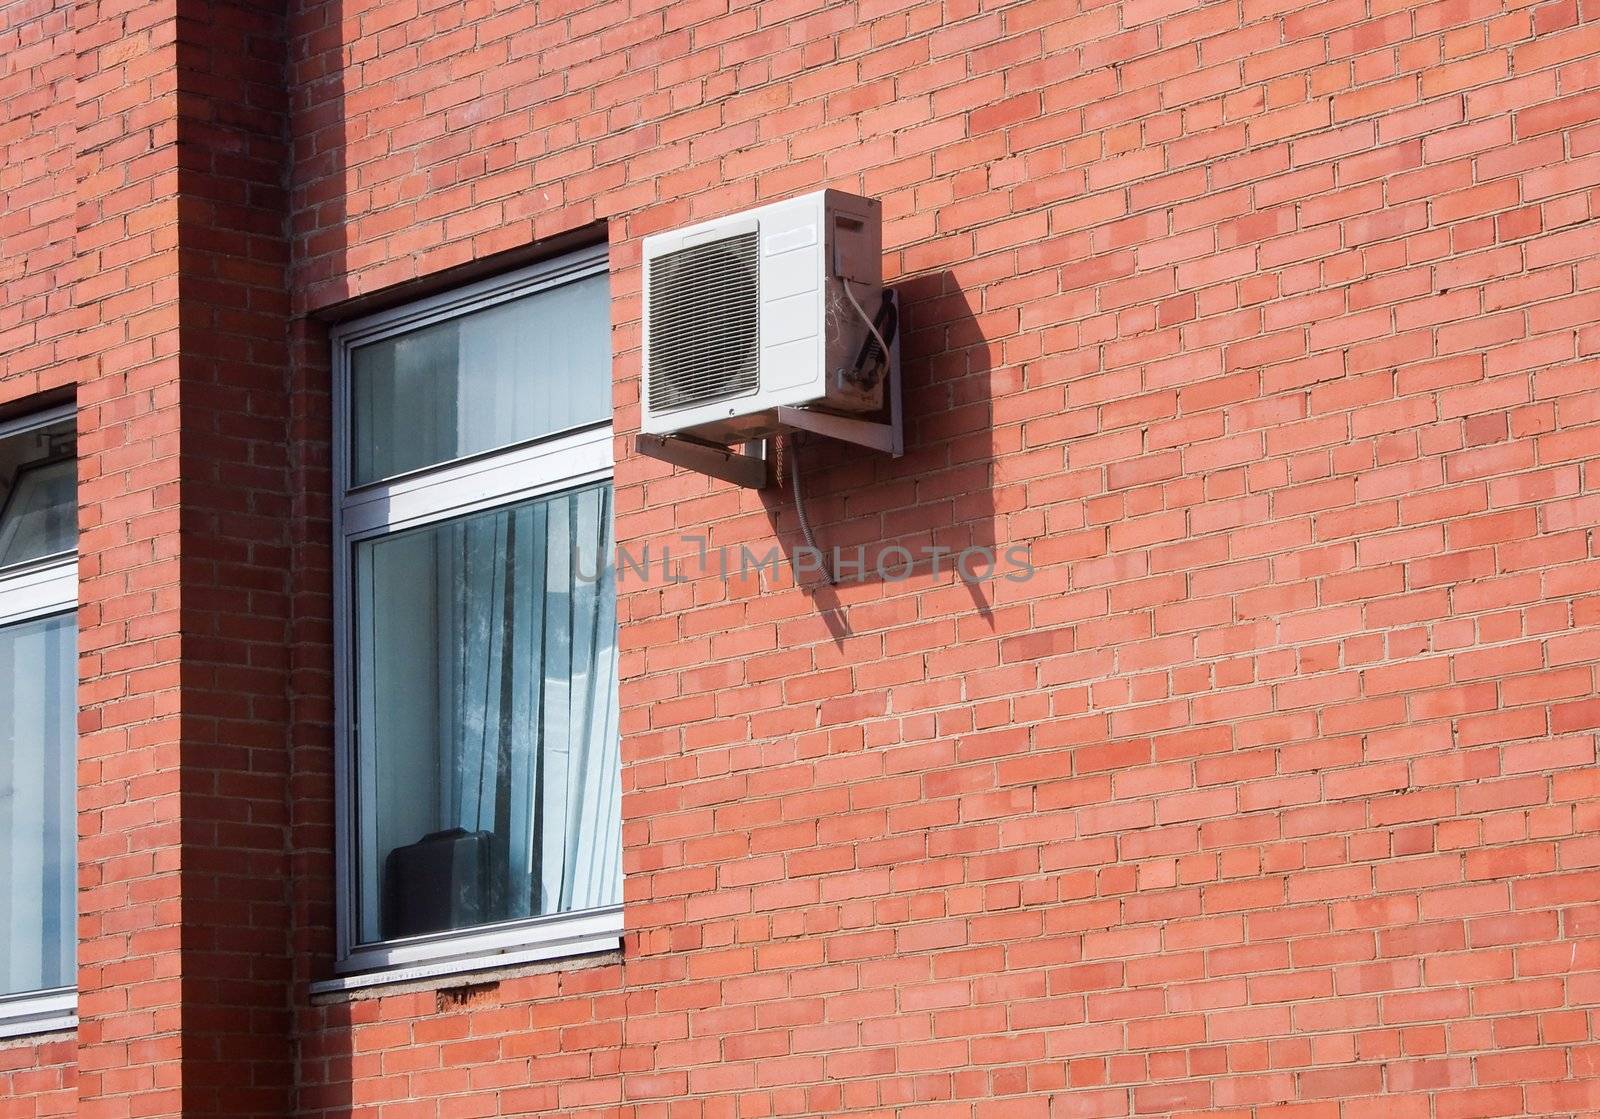 Air Conditioning on a brick wall